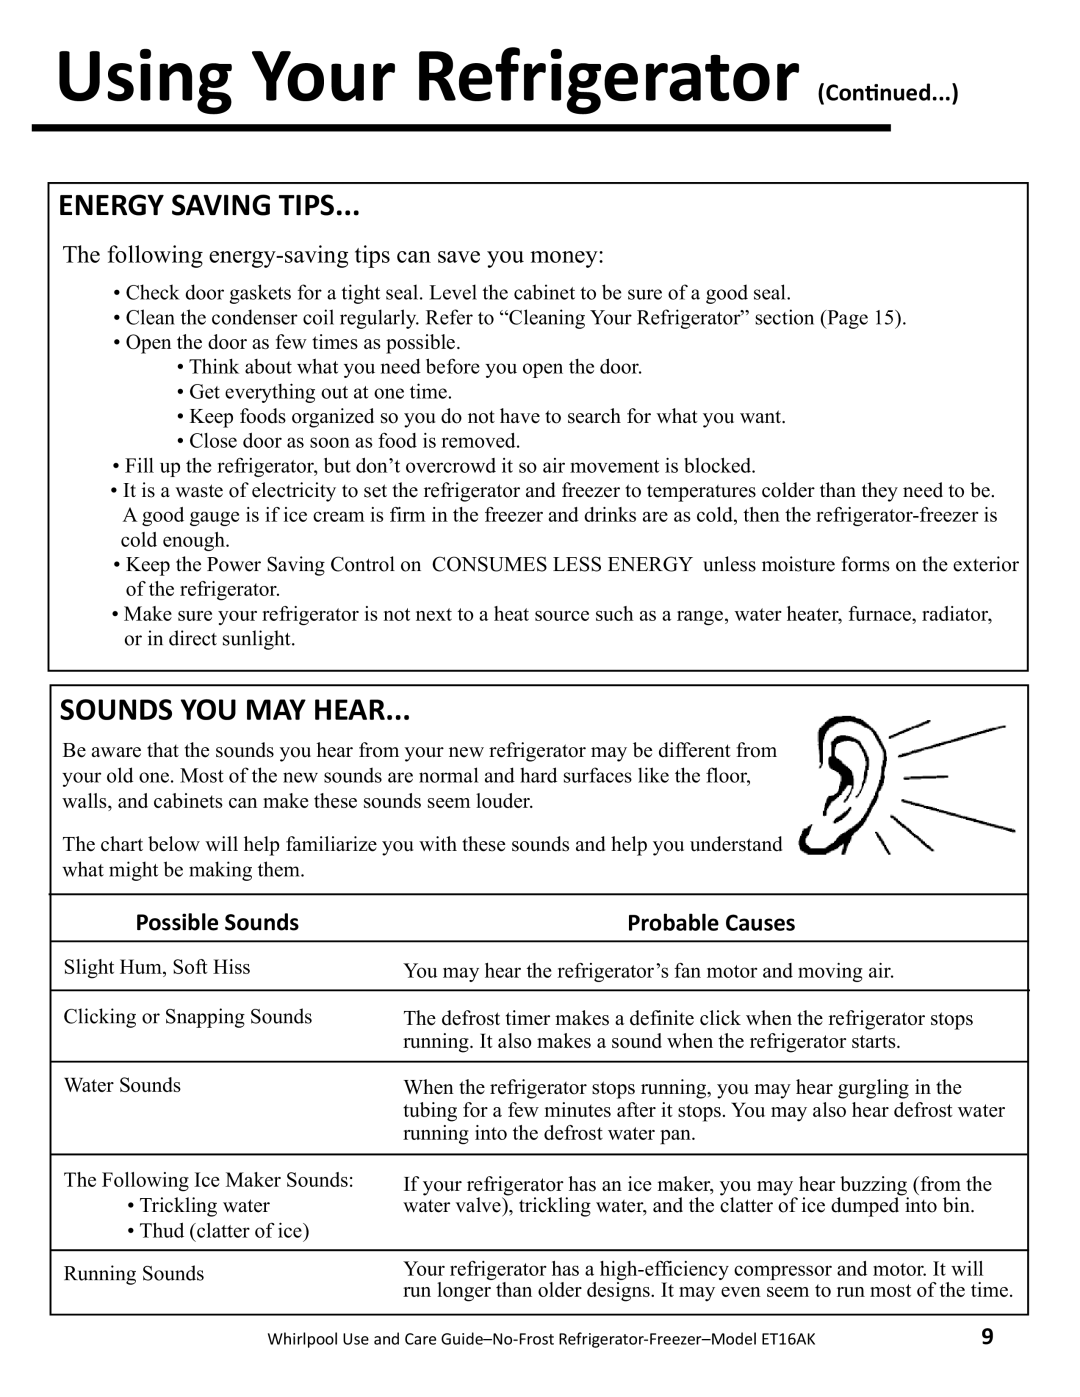 Whirlpool ET16AK manual Energy Saving Tips, Sounds You May Hear, Possible Sounds, Probable Causes 